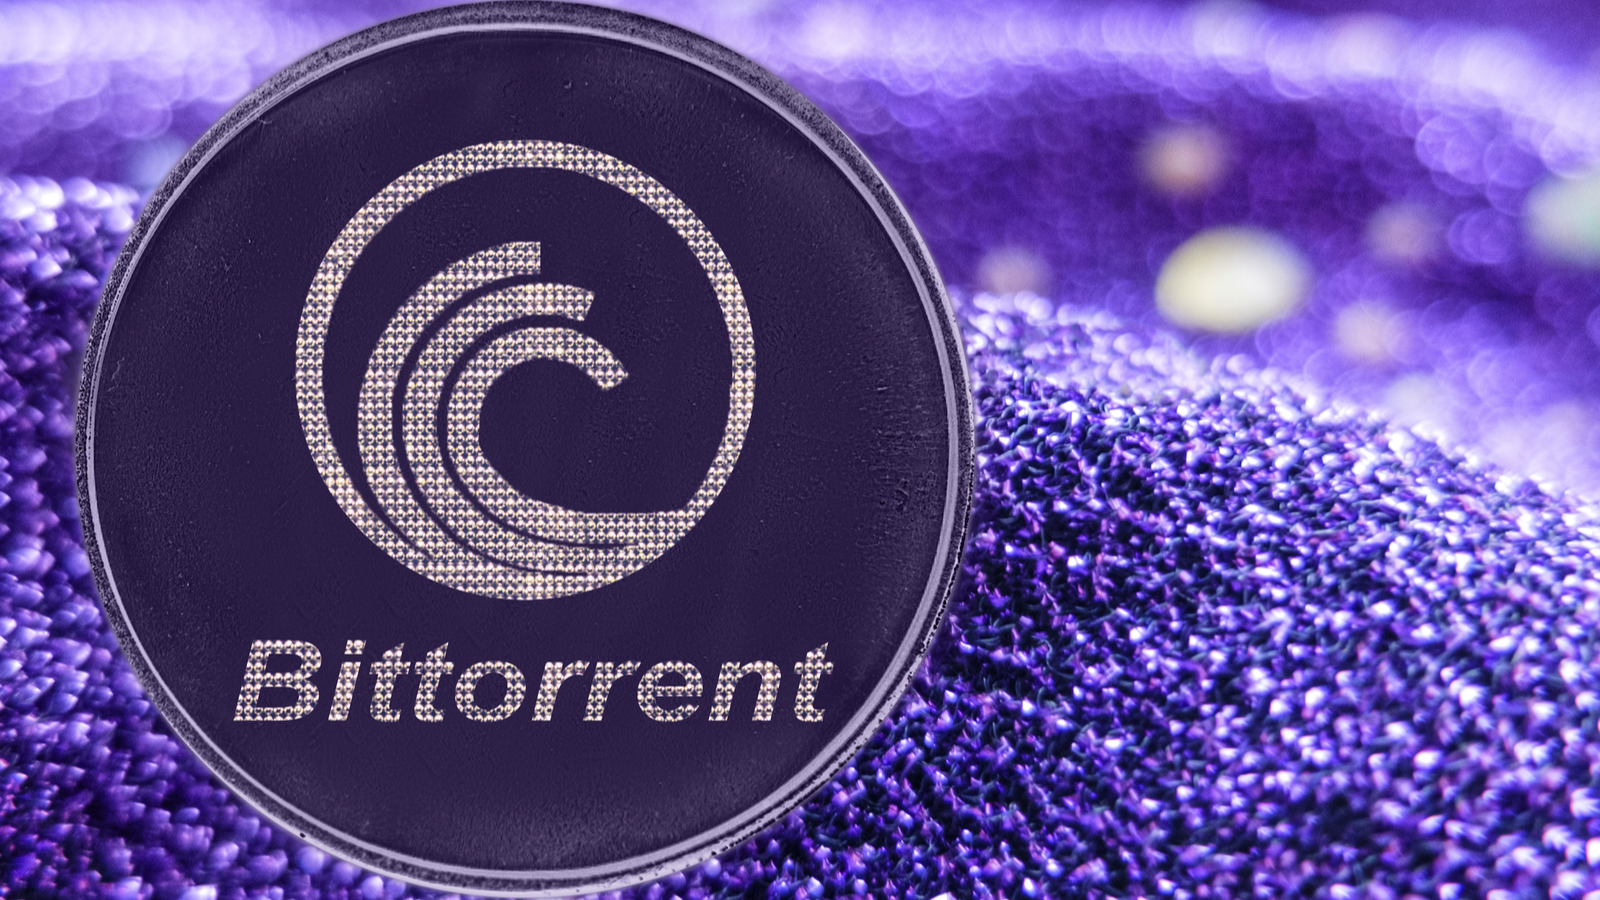 A BitTorrent (BitTorrent Price Predictions) crypto token on a purple fabric background.